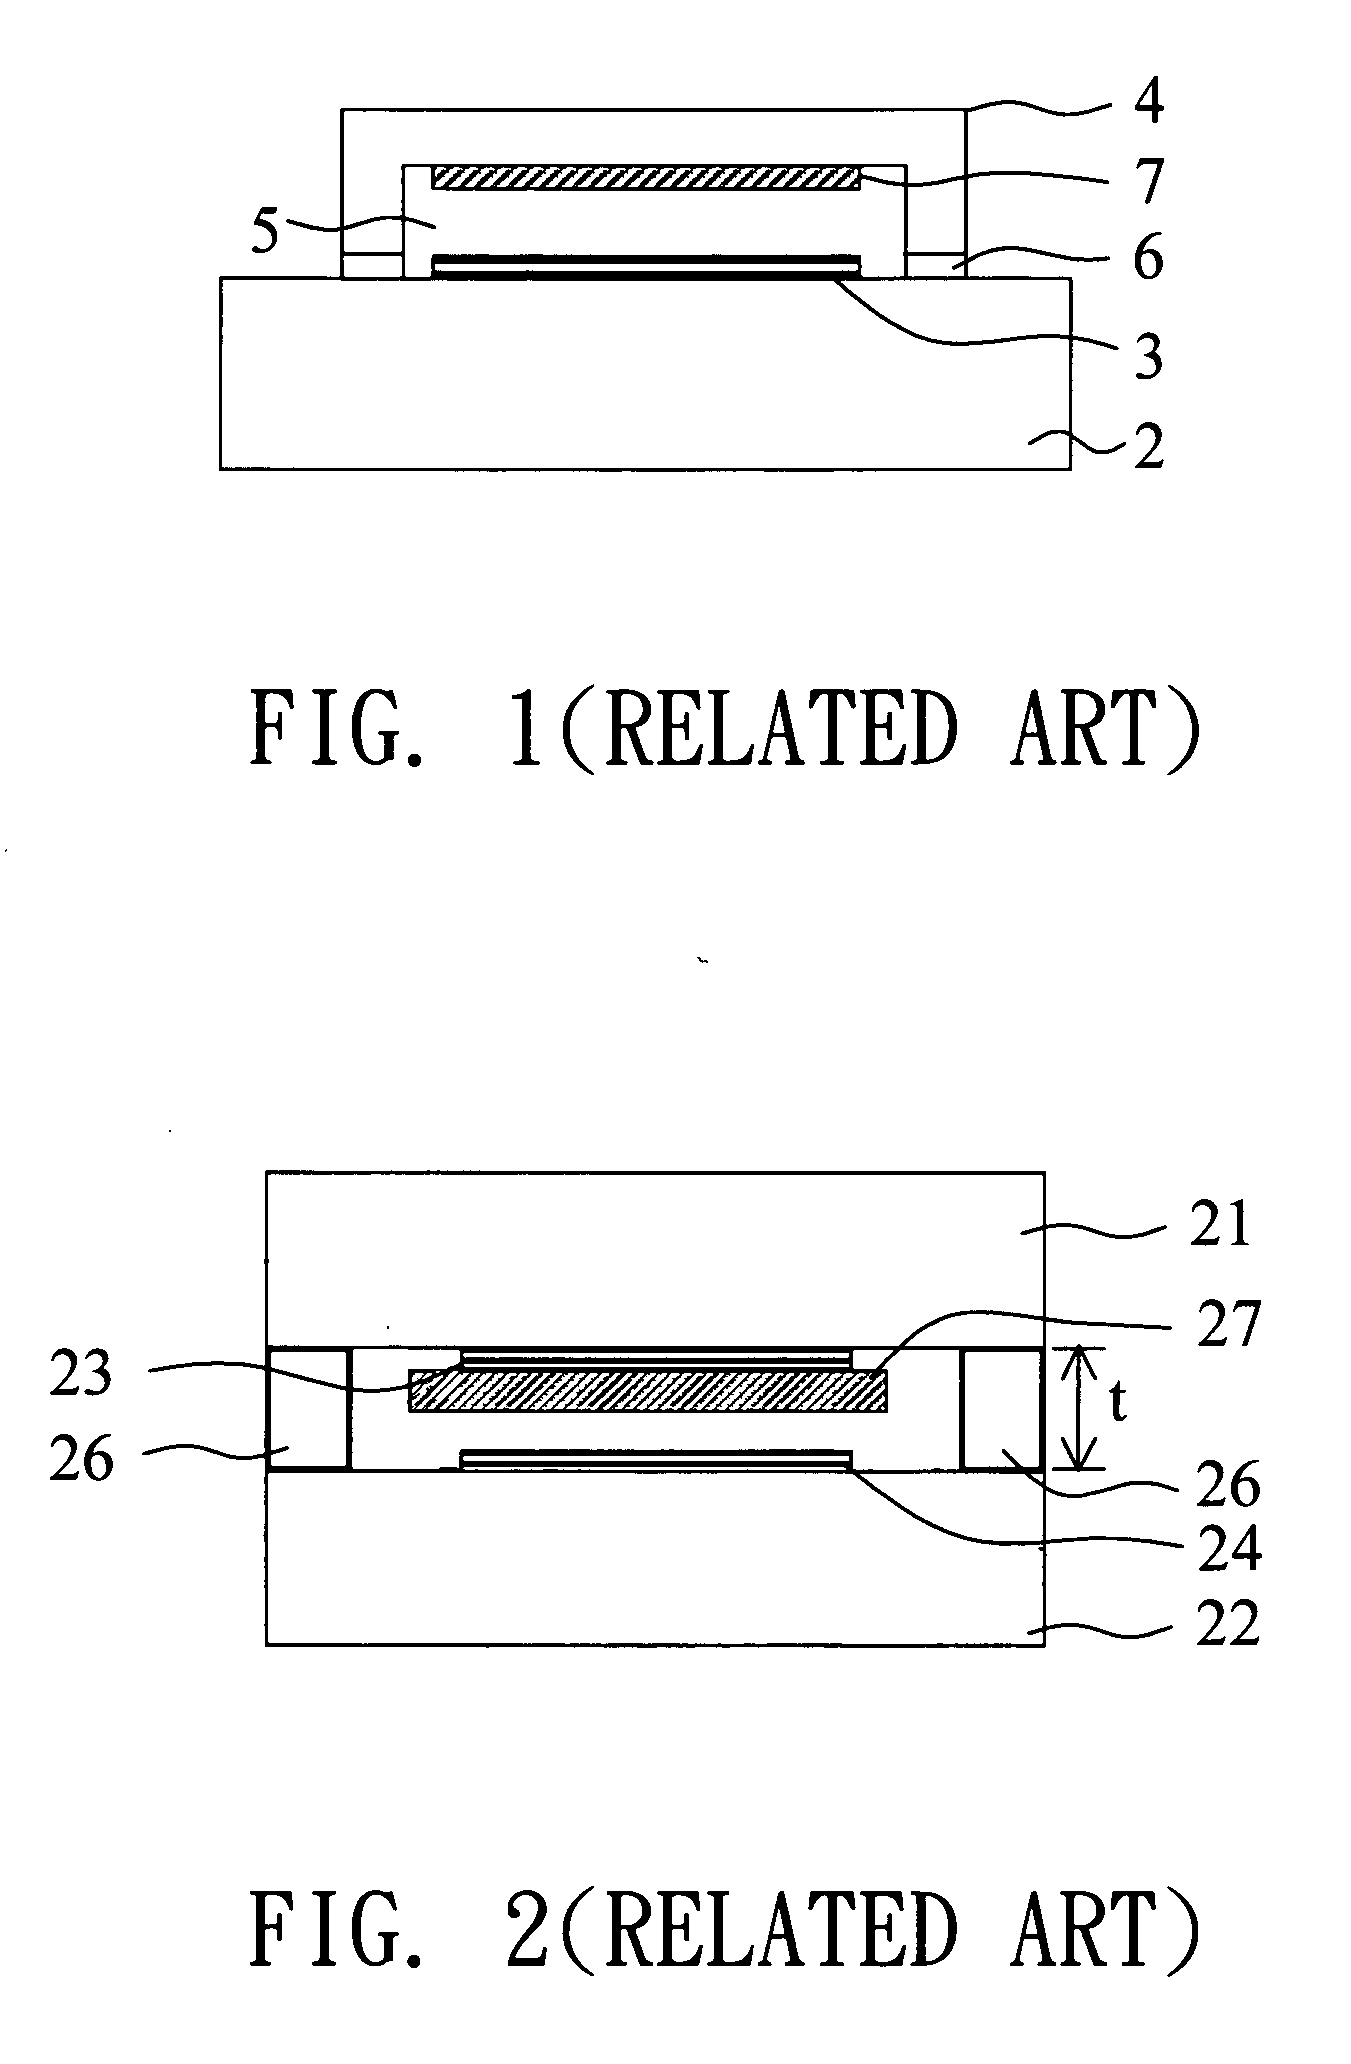 Encapsulation structure of double sided organic light emitting device and method of fabricating the same